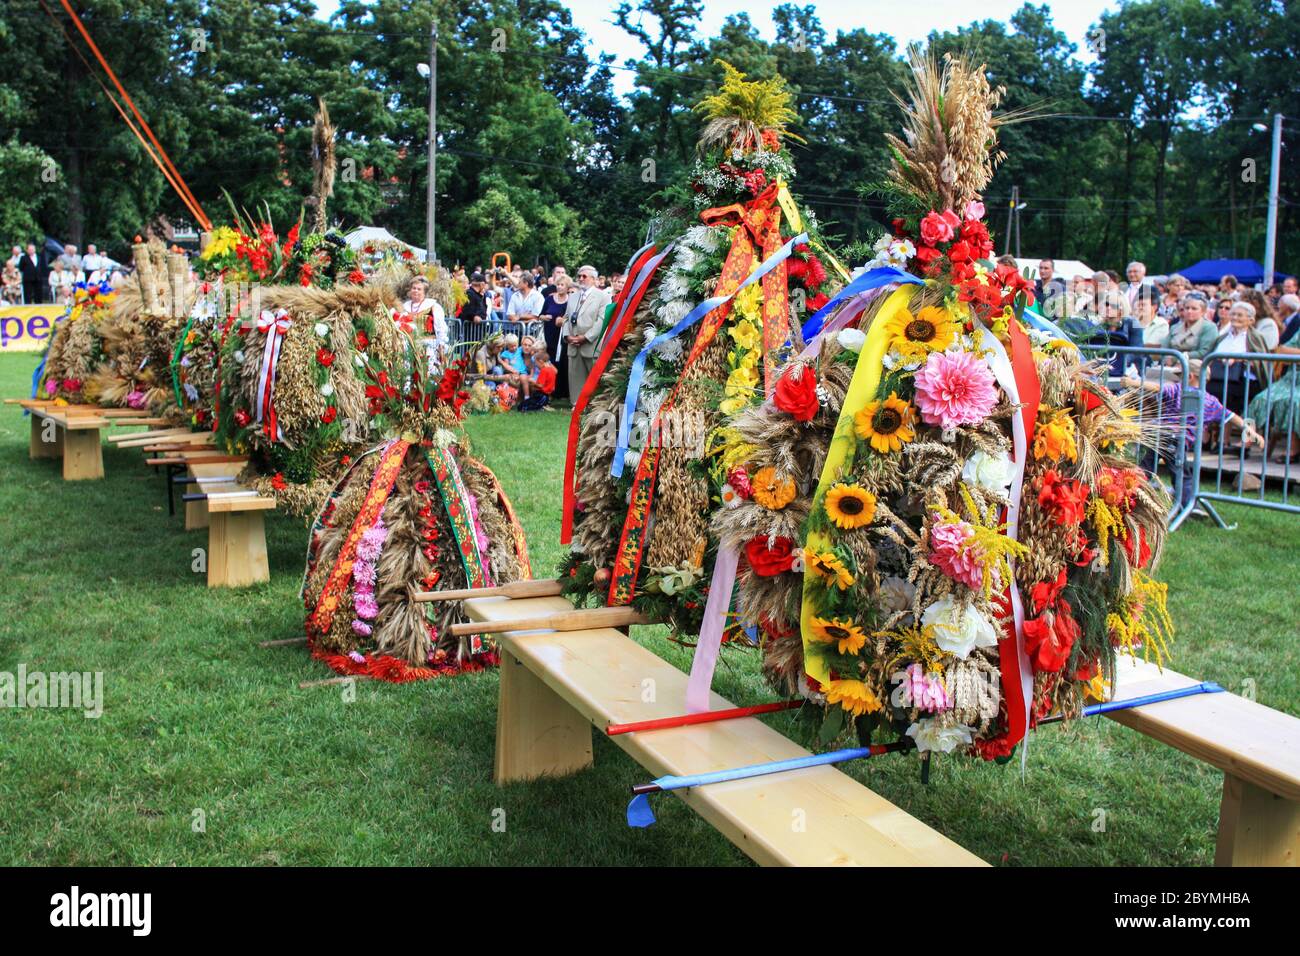 Annual Harvest Festival And Competition For The Most Beautiful Wreath In Krakow Poland Stock Photo Alamy